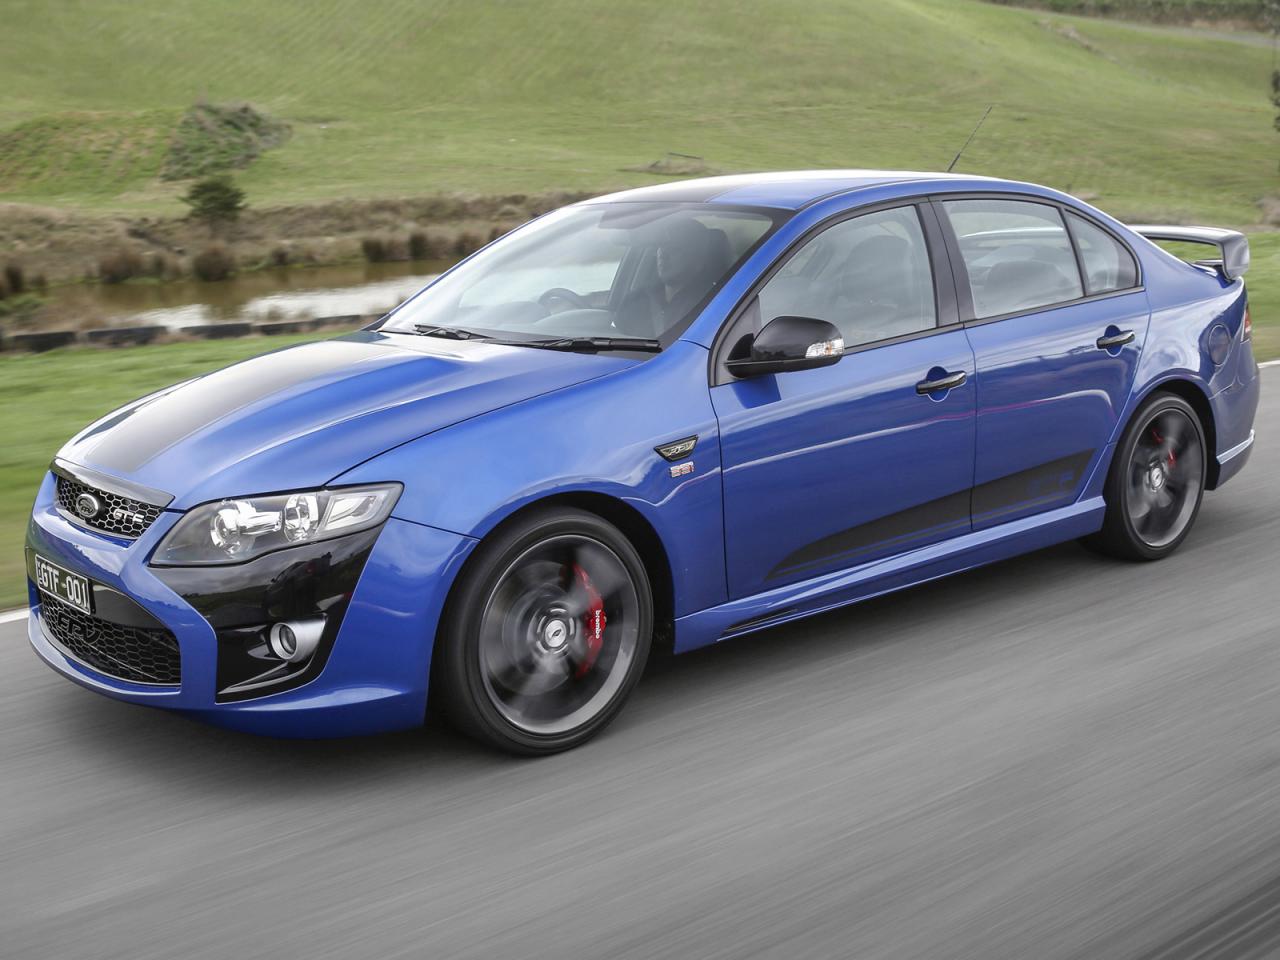 FPV GT F & Limited Edition Pursuit Ute officially revealed